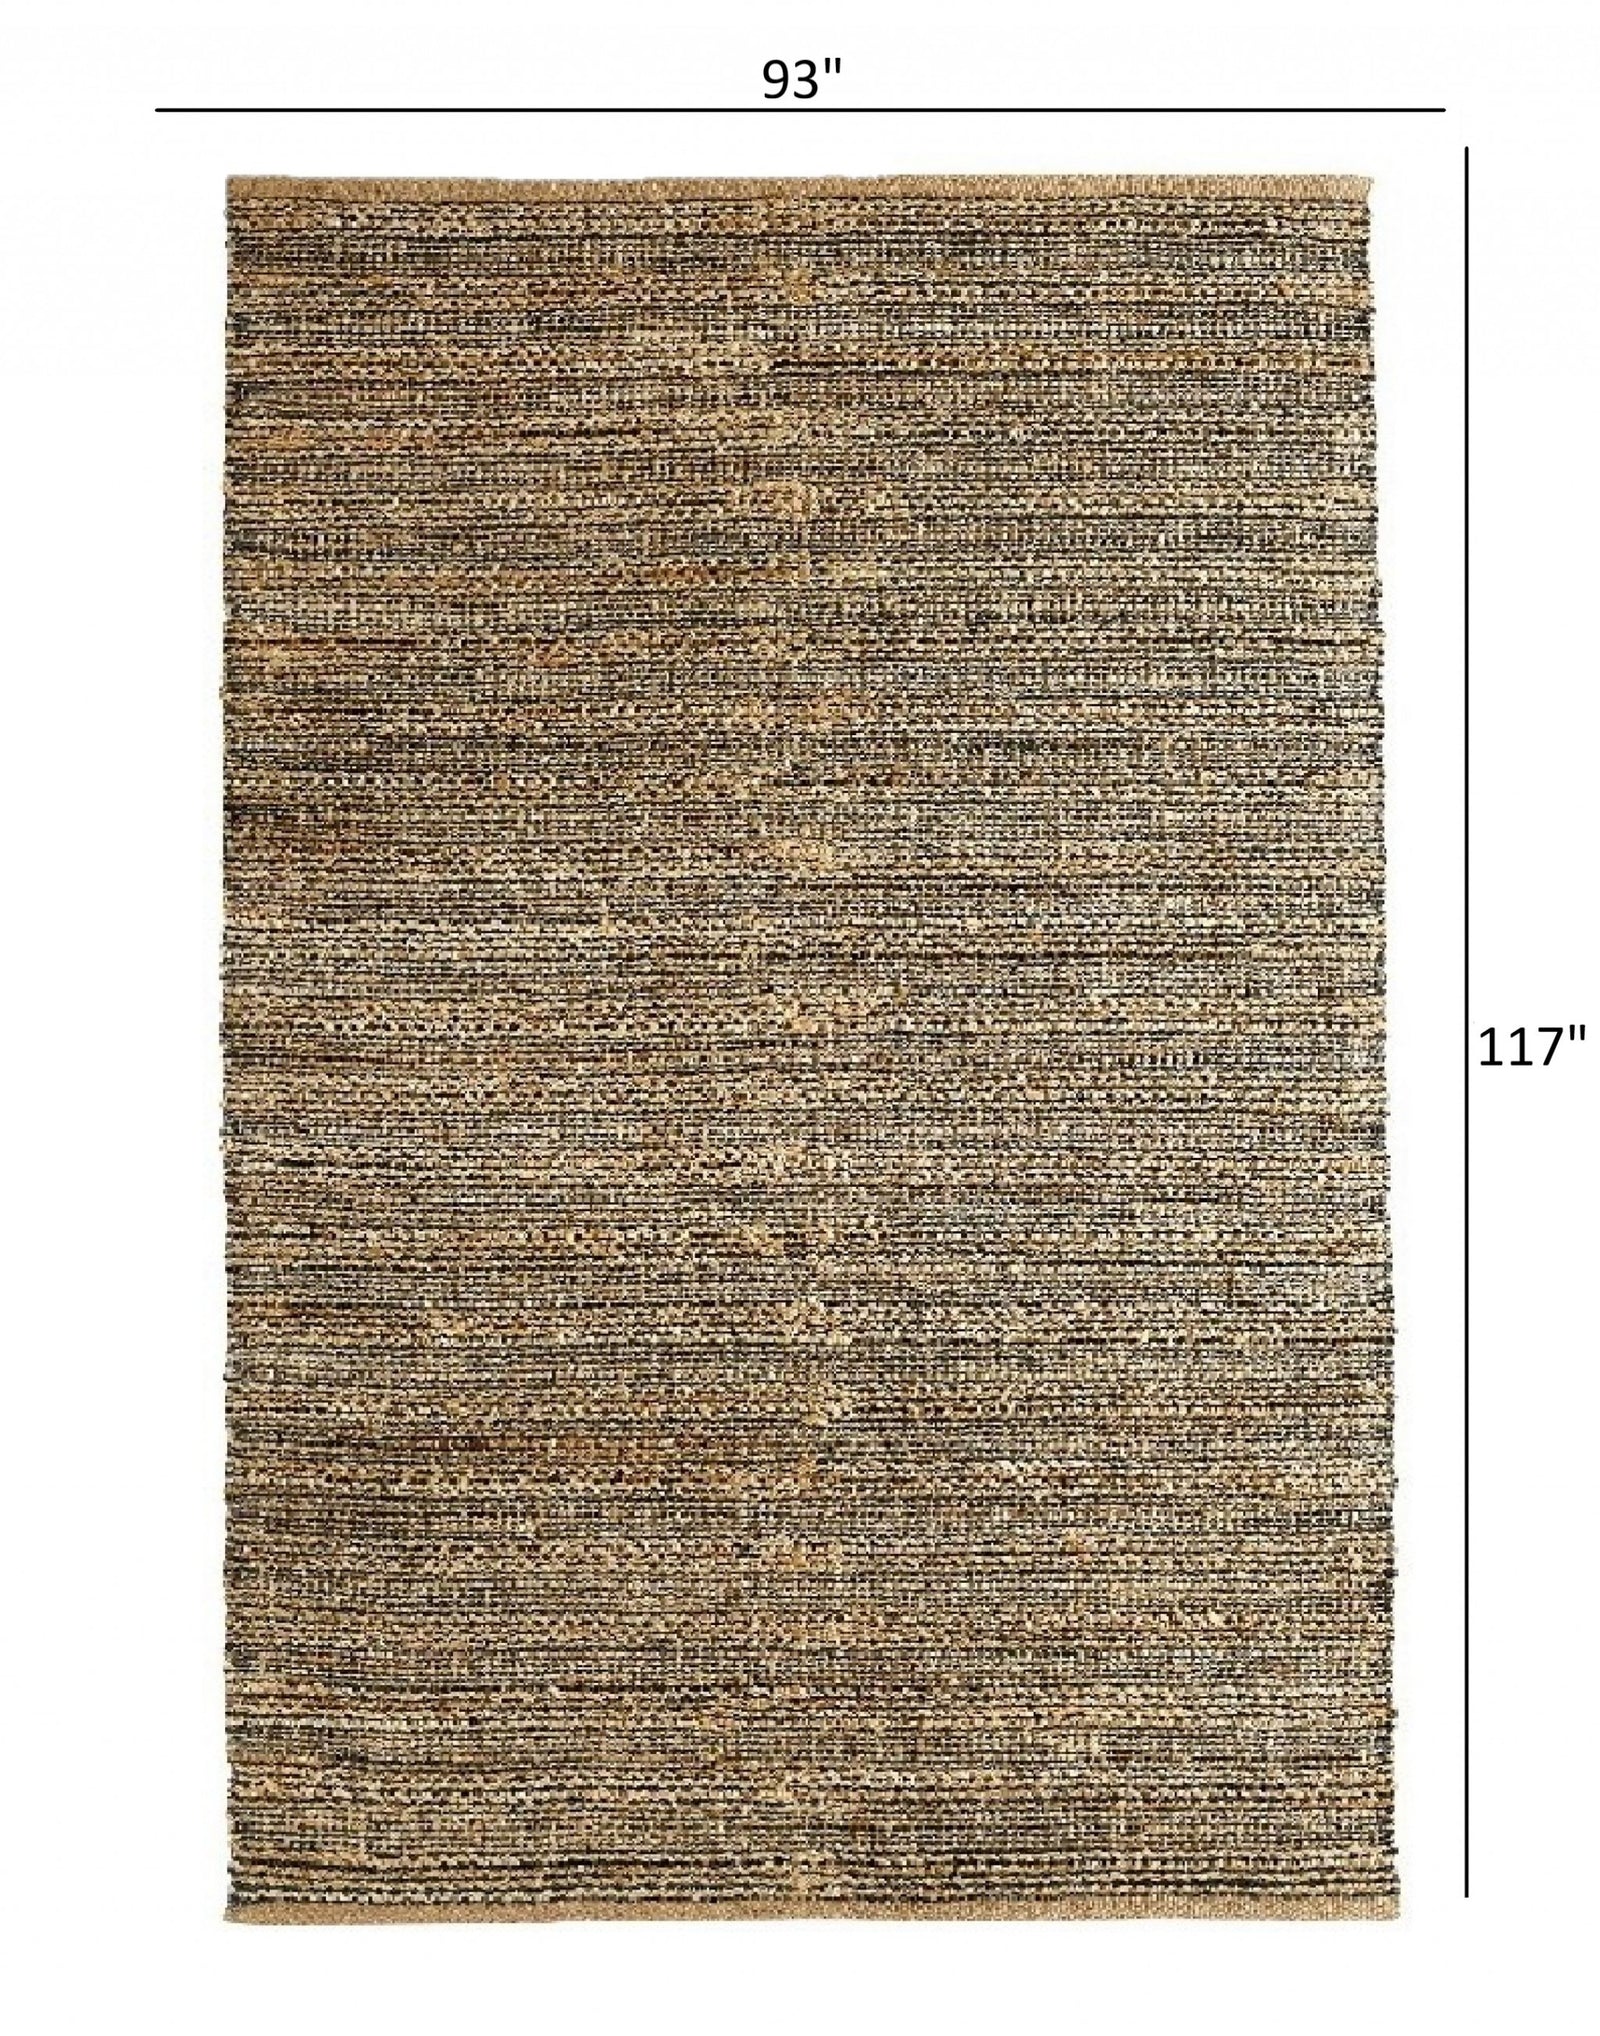 5’ x 8’ Gray and Natural Braided Striped Area Rug